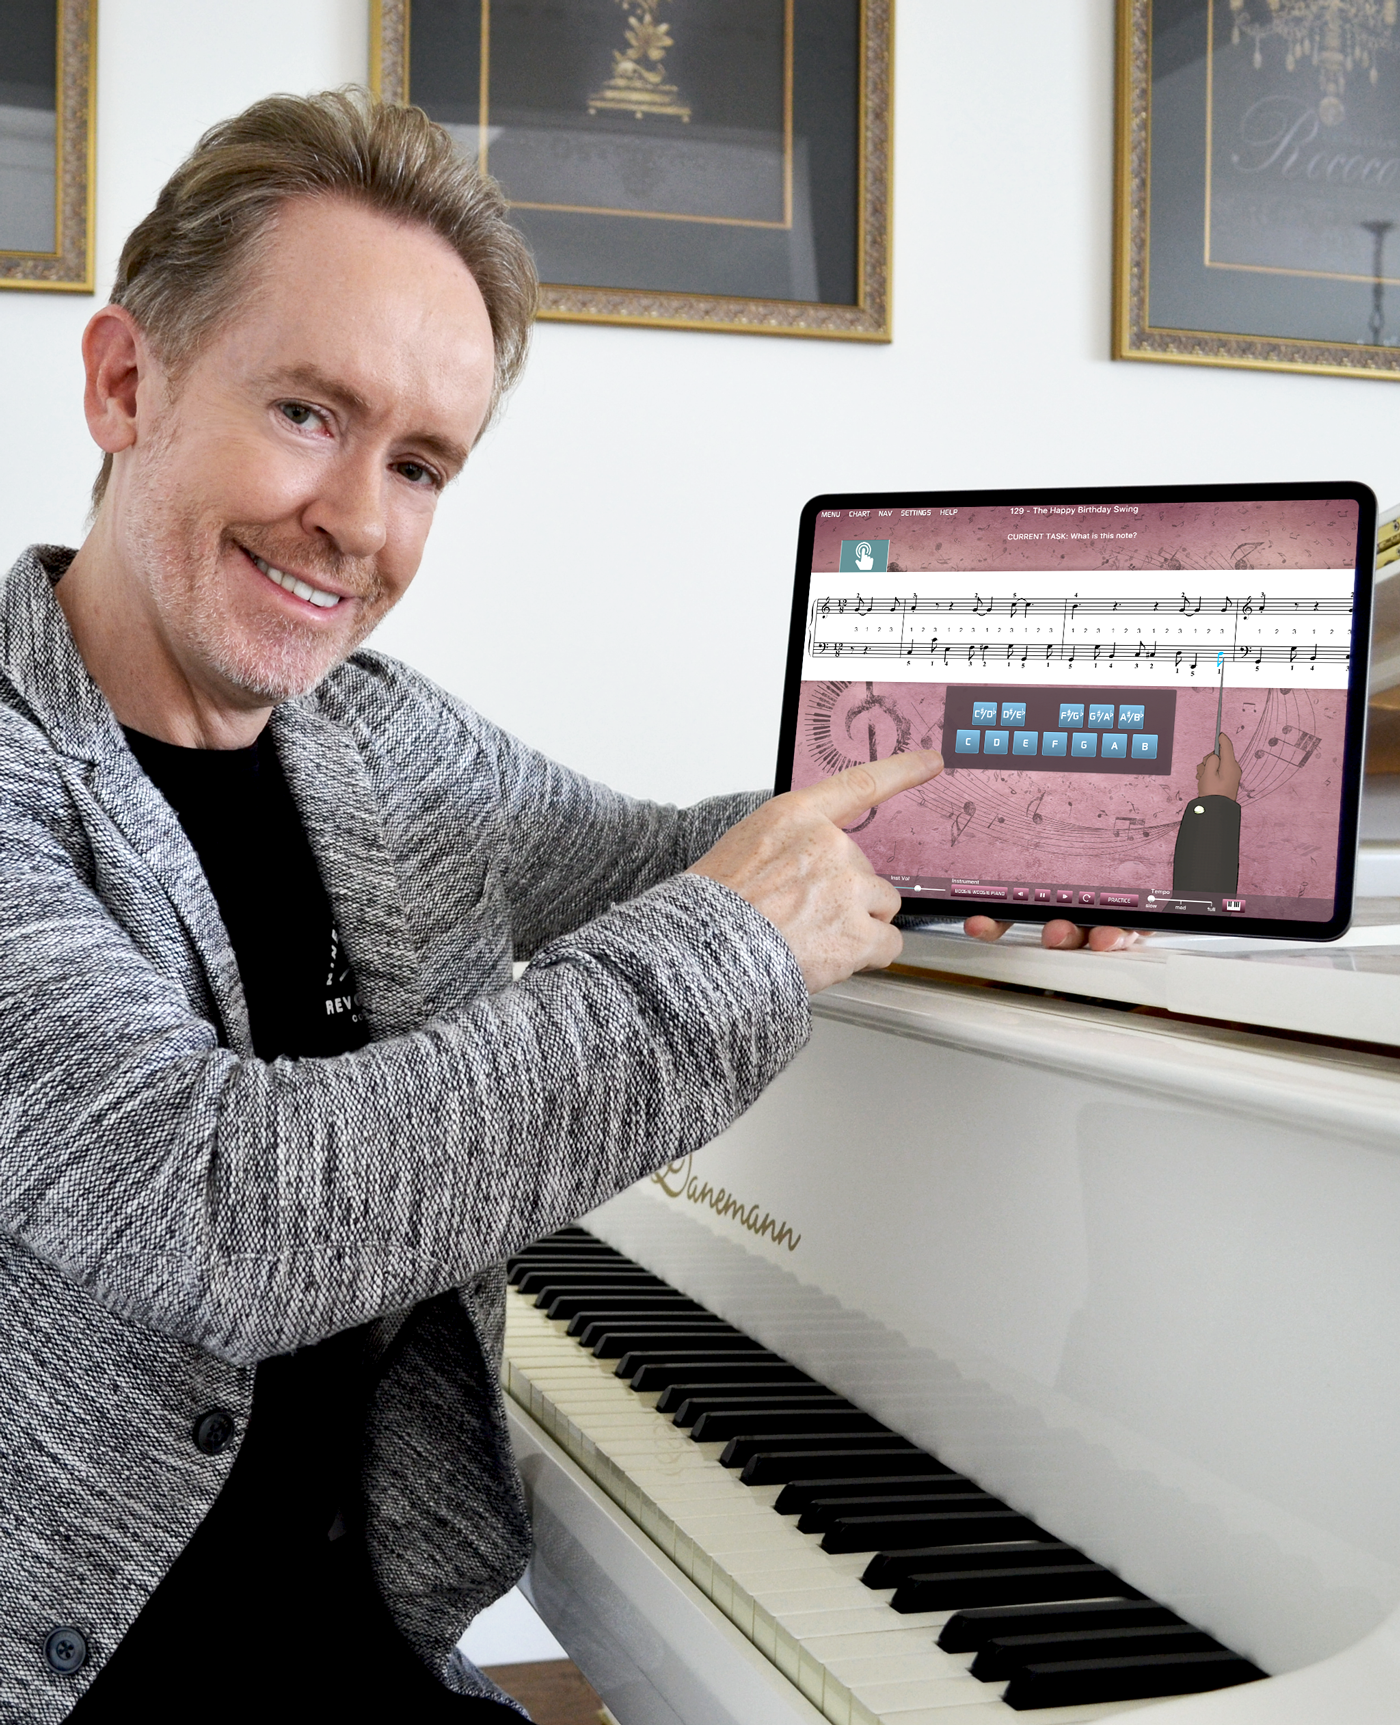 Musiah inventor shows new iPad piano lessons app